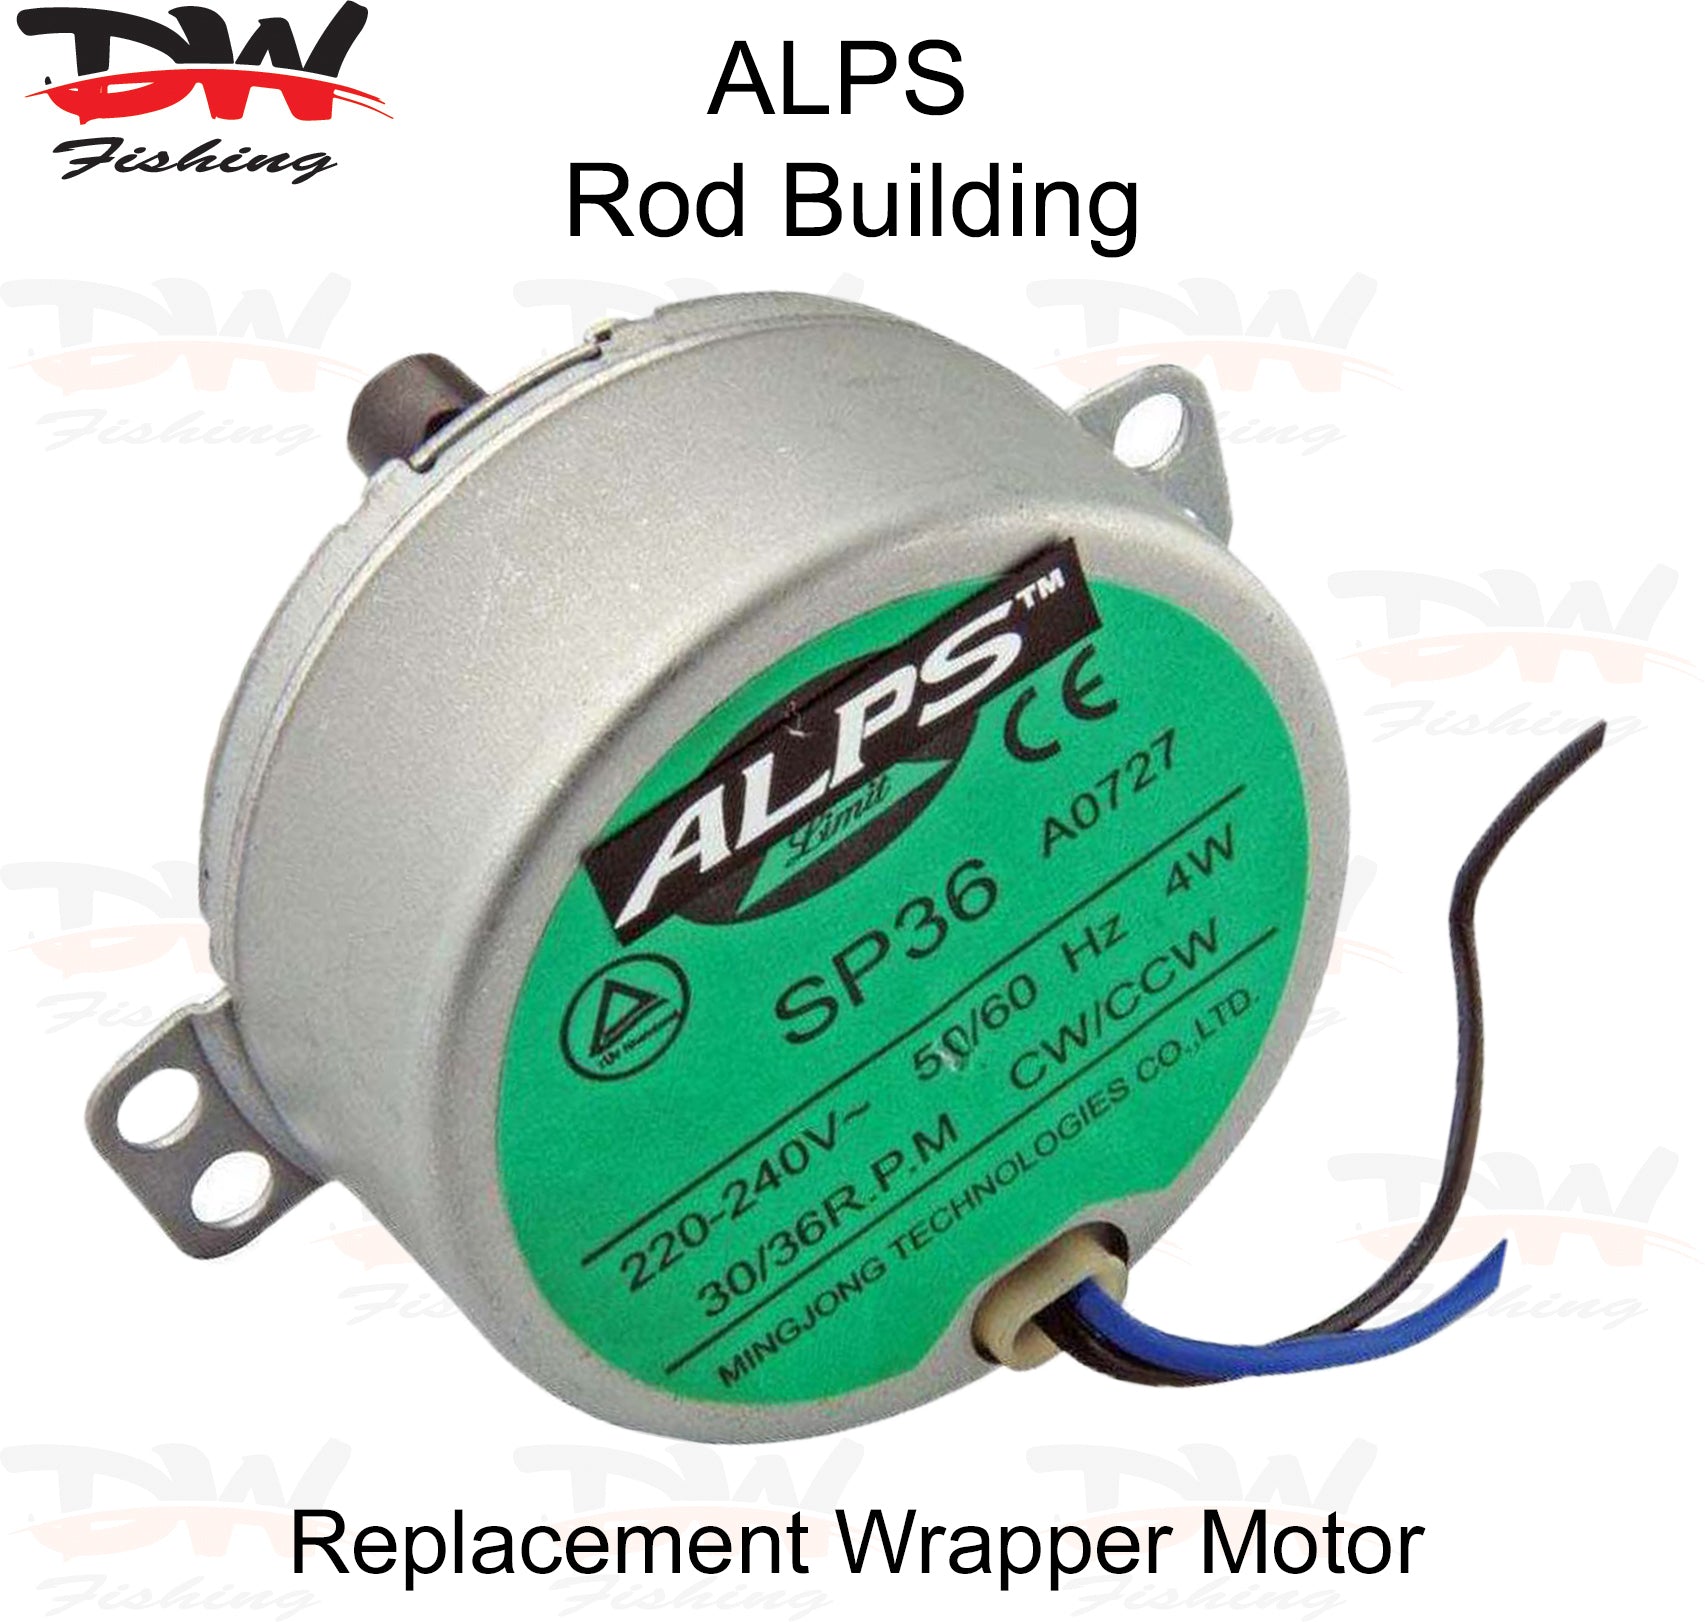 ALPS Replacement Motor to Suit ALPS Rod Wrapping Machine